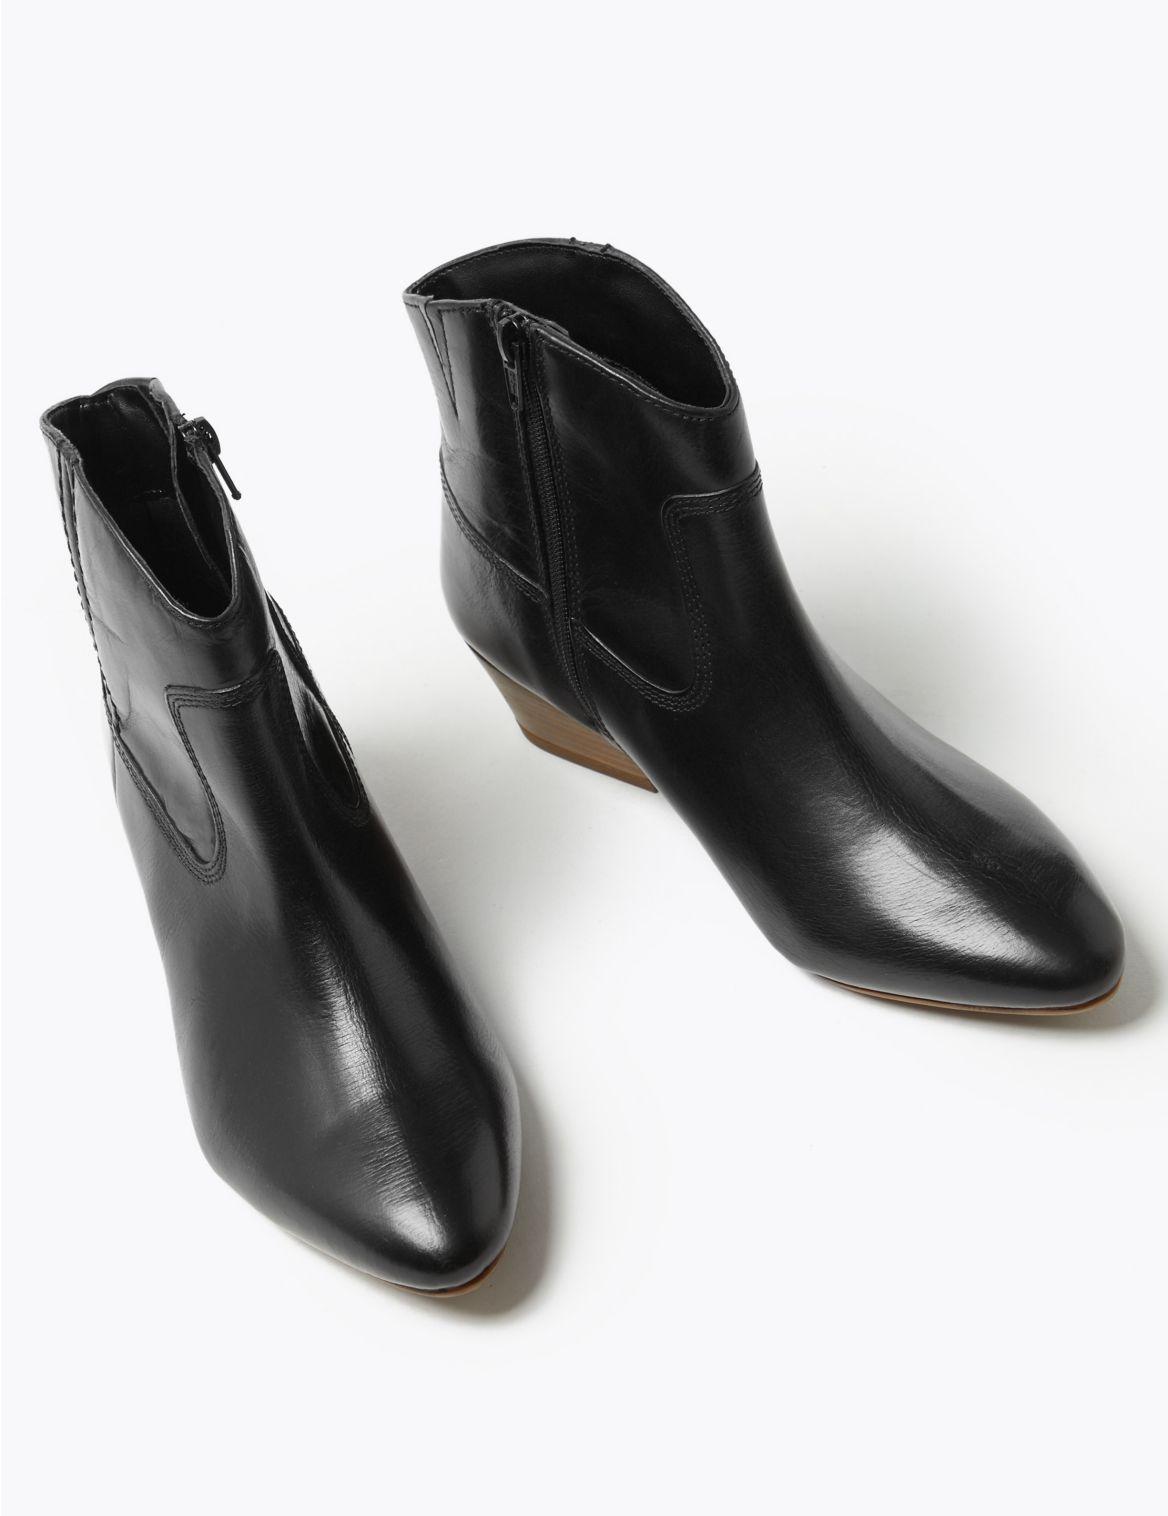 Marks & Spencer Leather Block Heel Western Ankle Boots in Black - Lyst